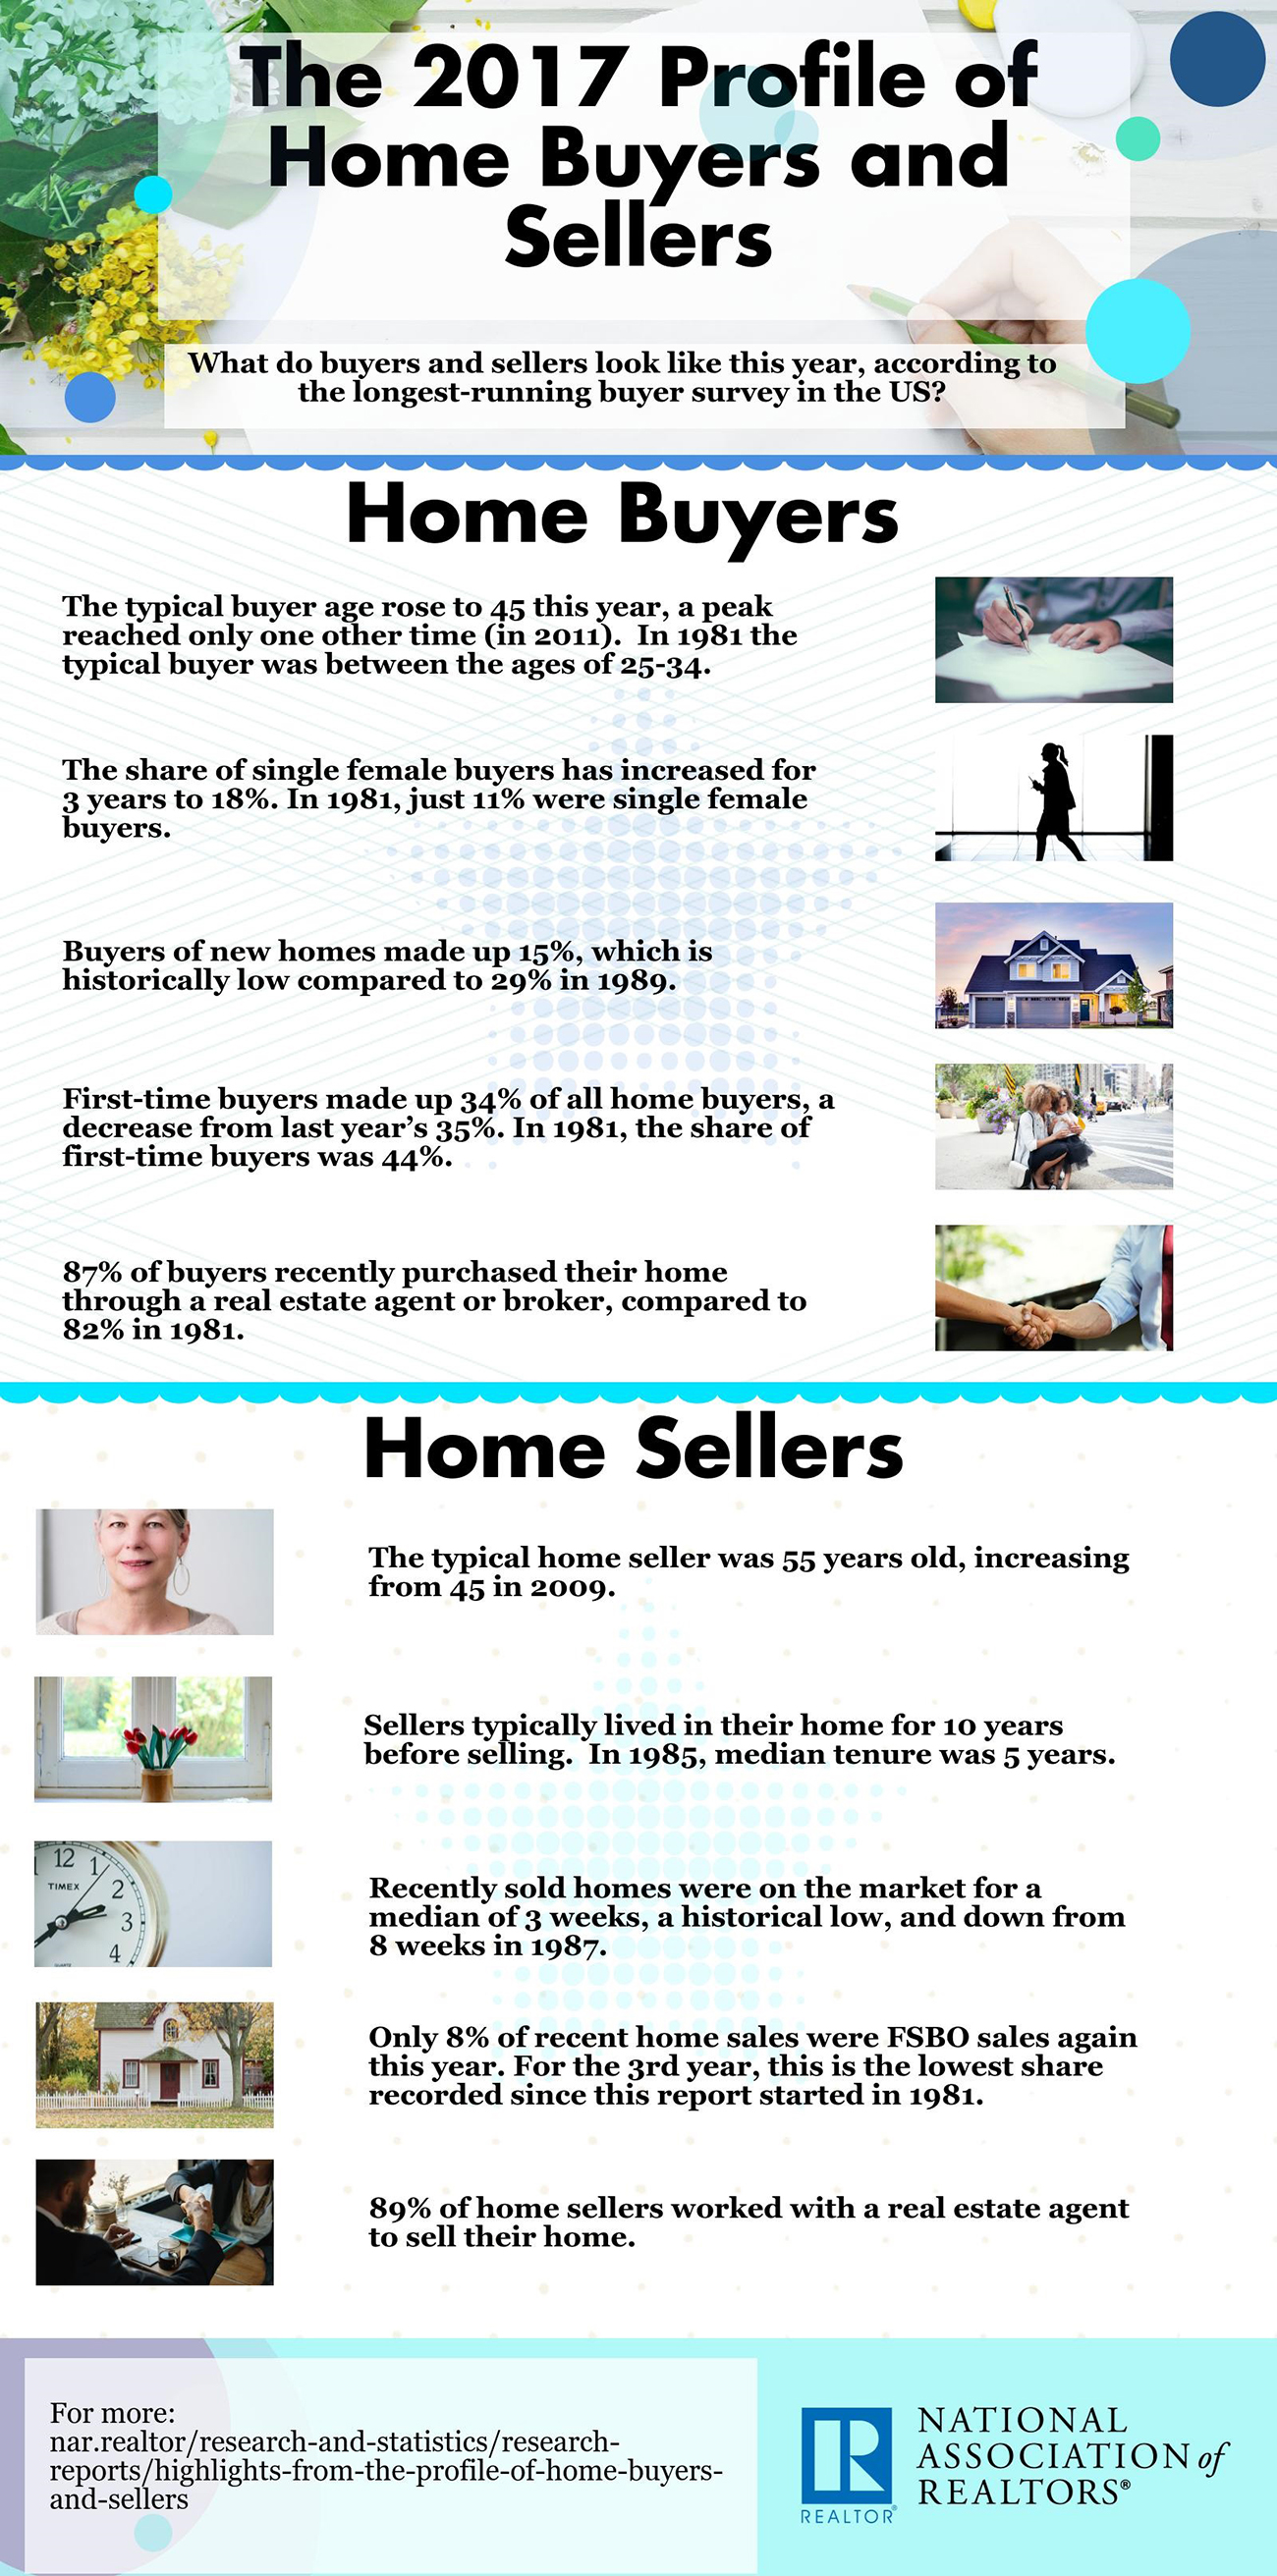 2017 profile of home buyers and sellers infographic 10 30 2017 1300w 2623h